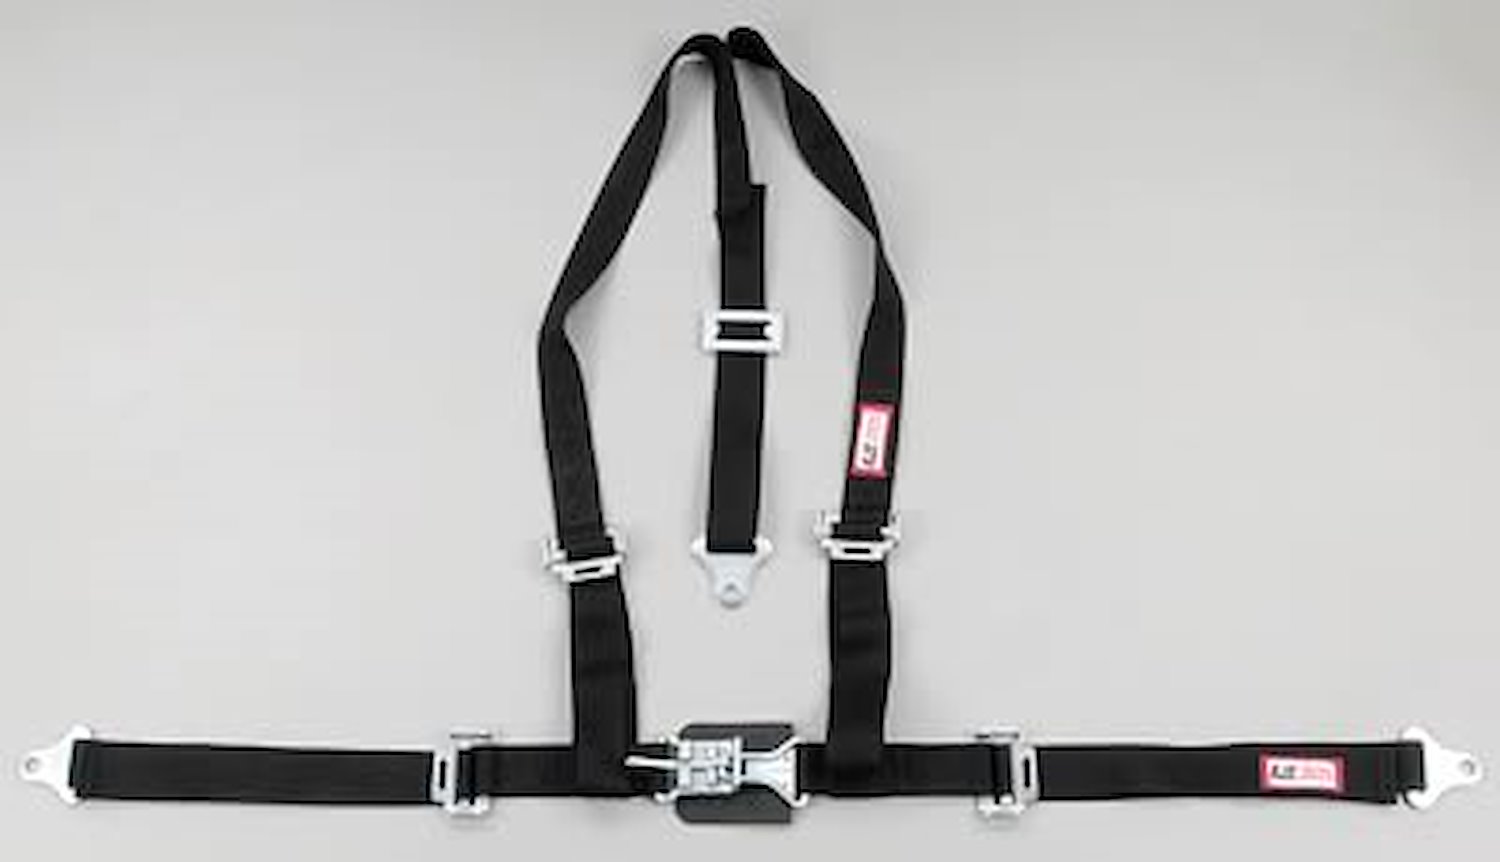 NON-SFI L&L HARNESS 2 PULL DOWN Lap Belt SNAP SEWN IN 2 S.H. INDIVIDUAL FLOOR Mount w/STERNUM STRAP WRAP/SNAP YELLOW